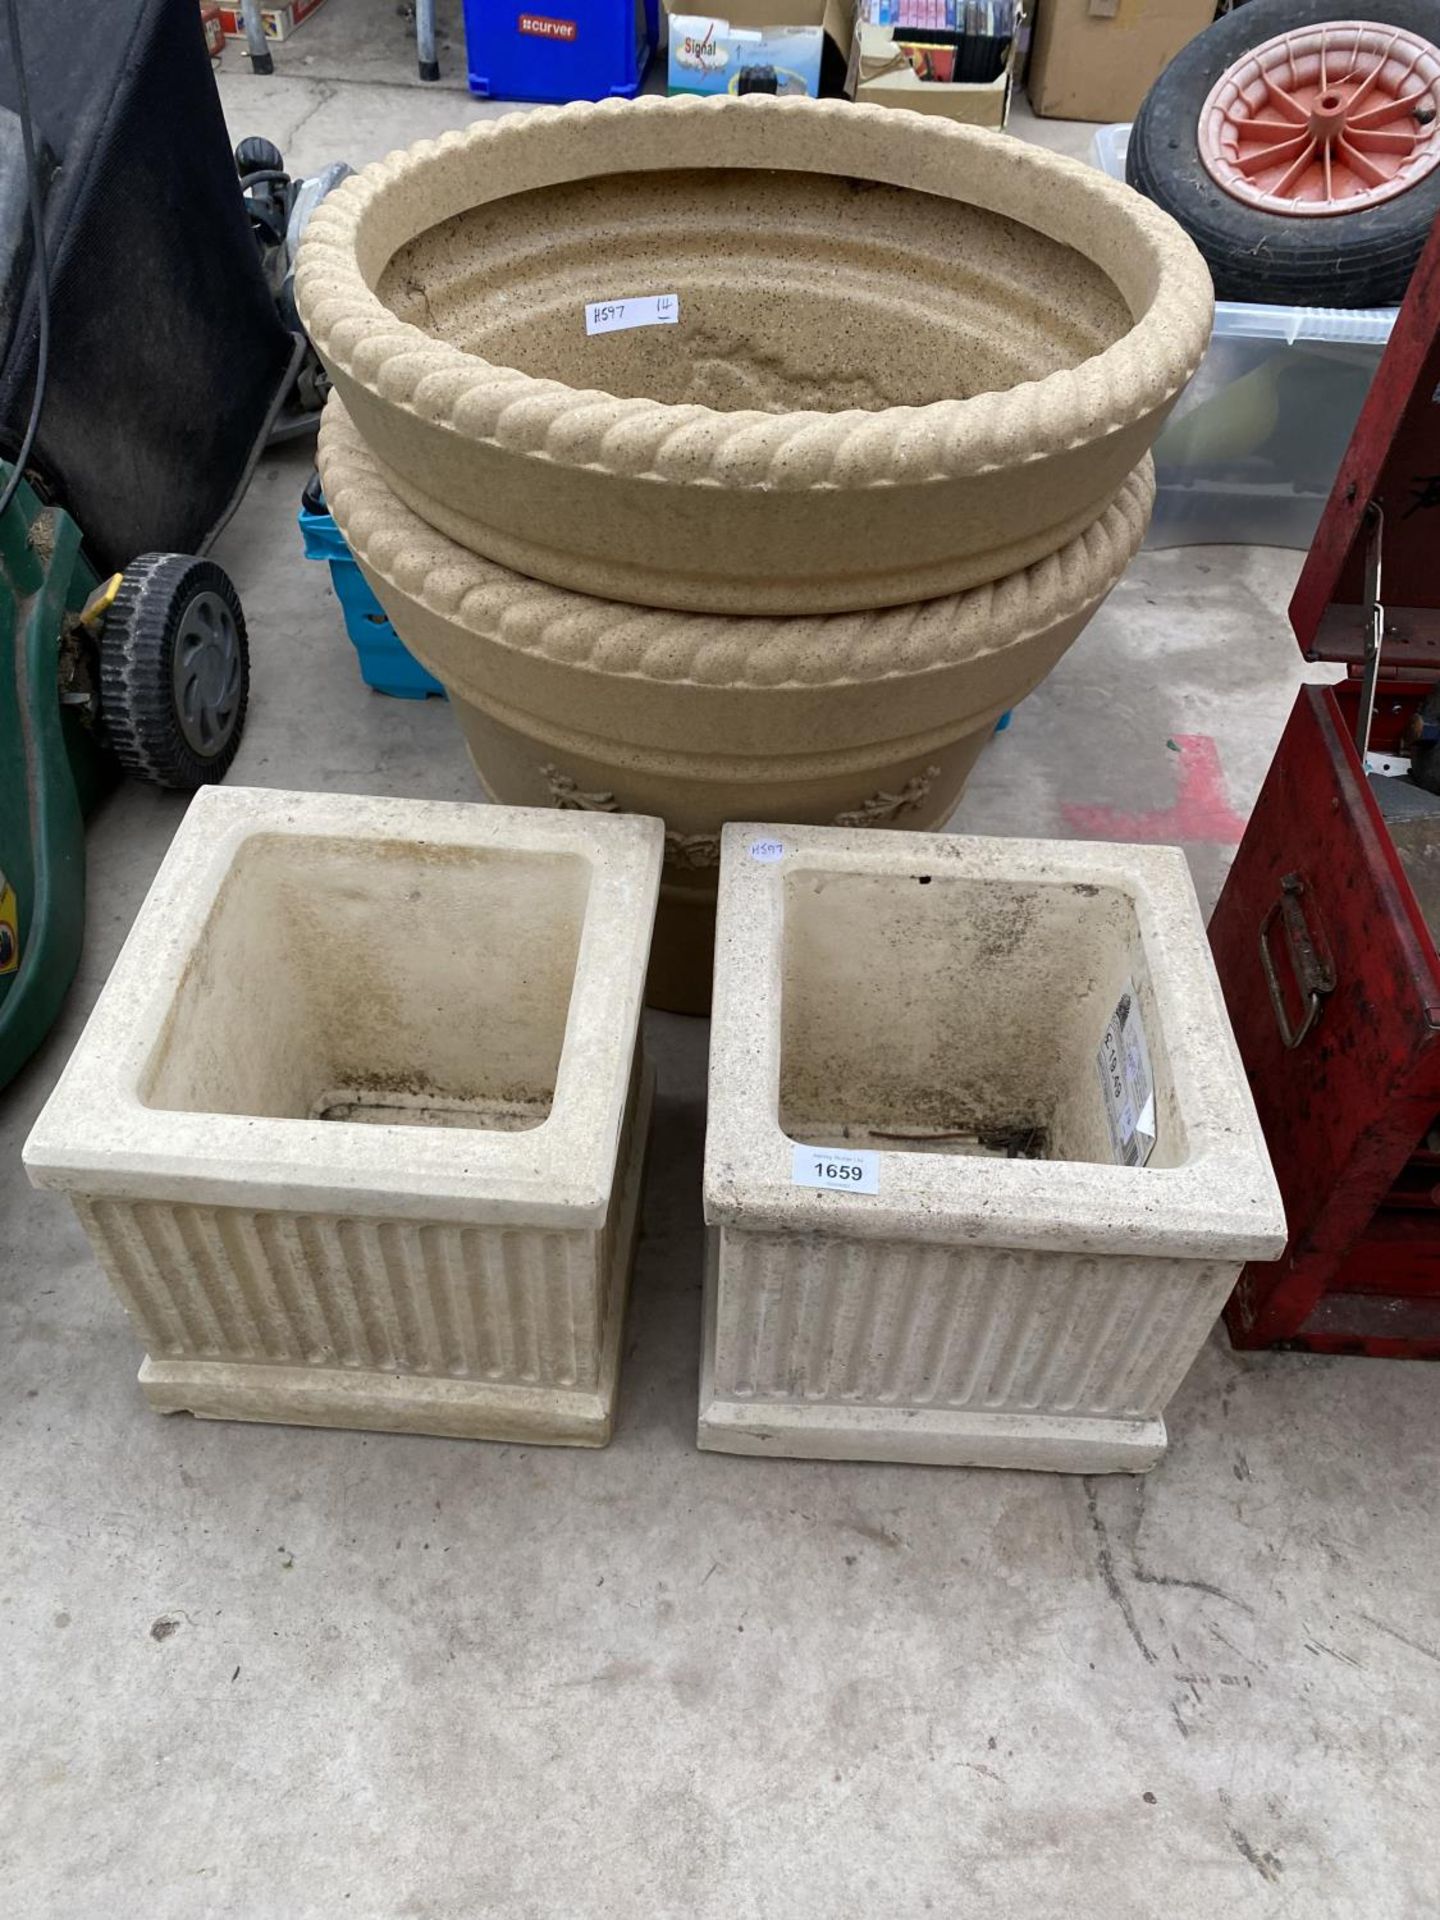 A PAIR OF SMALL RECONSTITUTED STONE PLANTERS AND A FURTHER PAIR OF ROUND PLASTIC PLANTERS